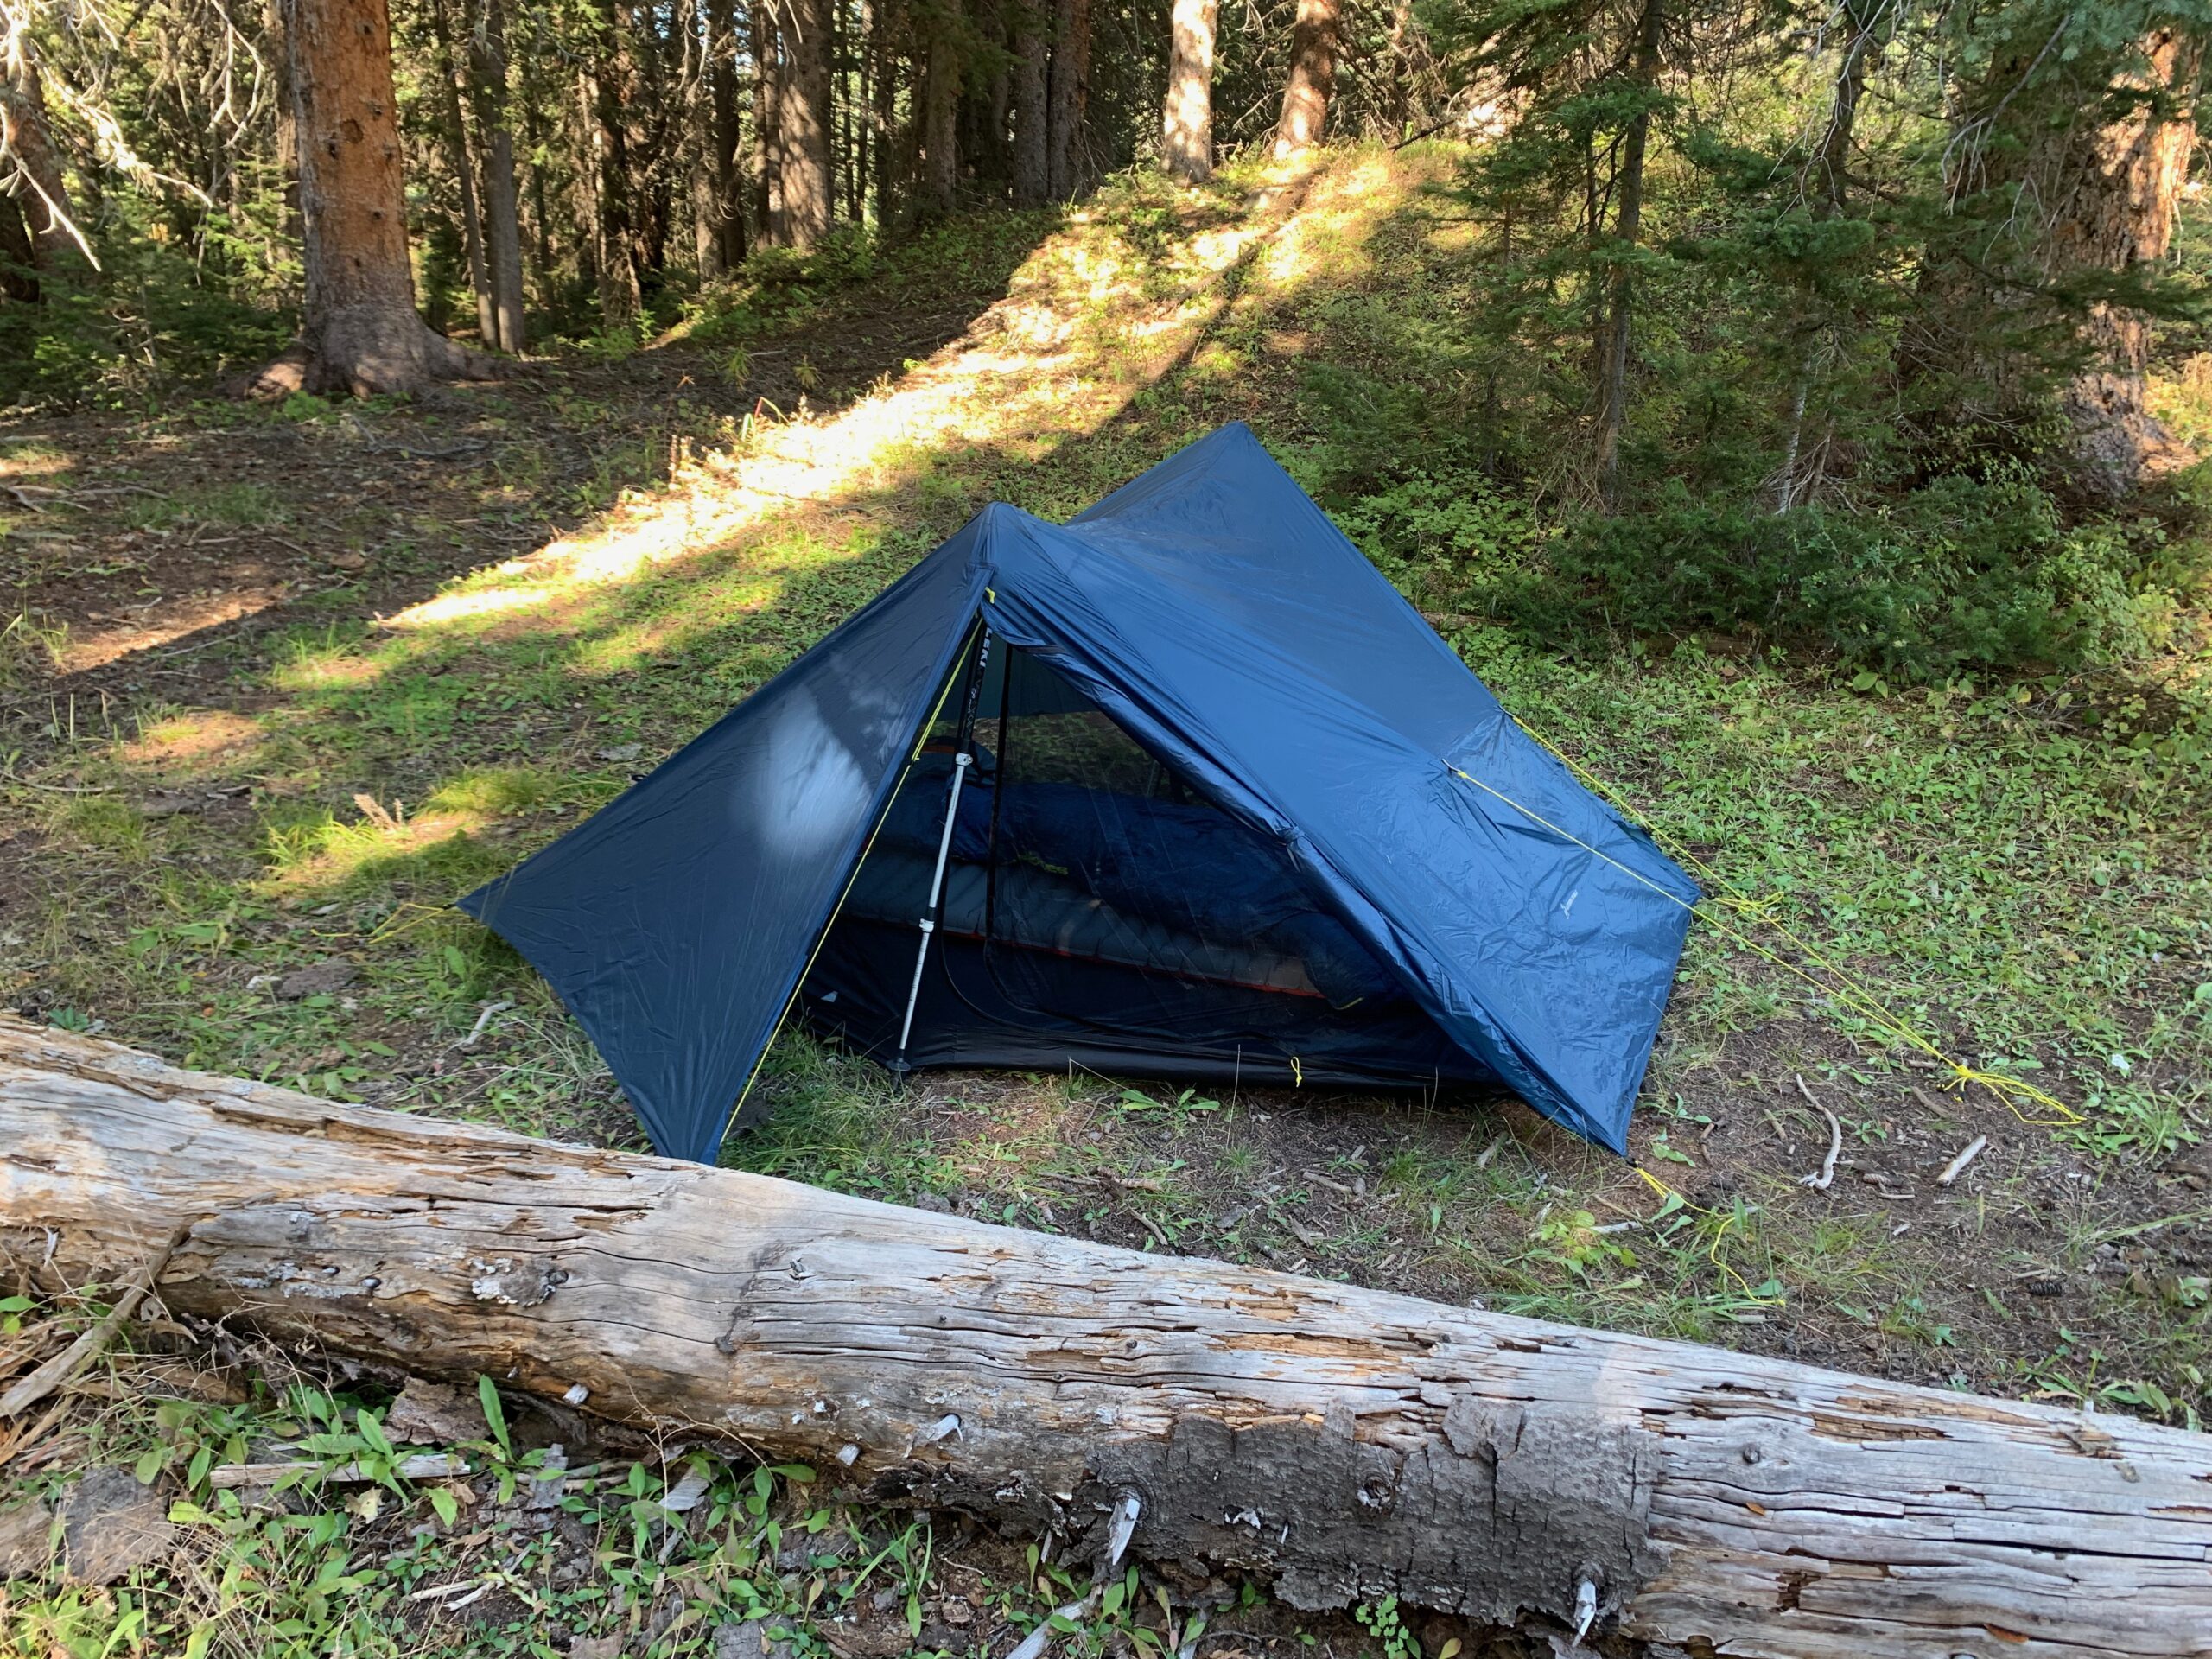 Kara Williard reviews the Outdoor Vitals Fortius 2P Trekking Pole Tent for BLISTER.